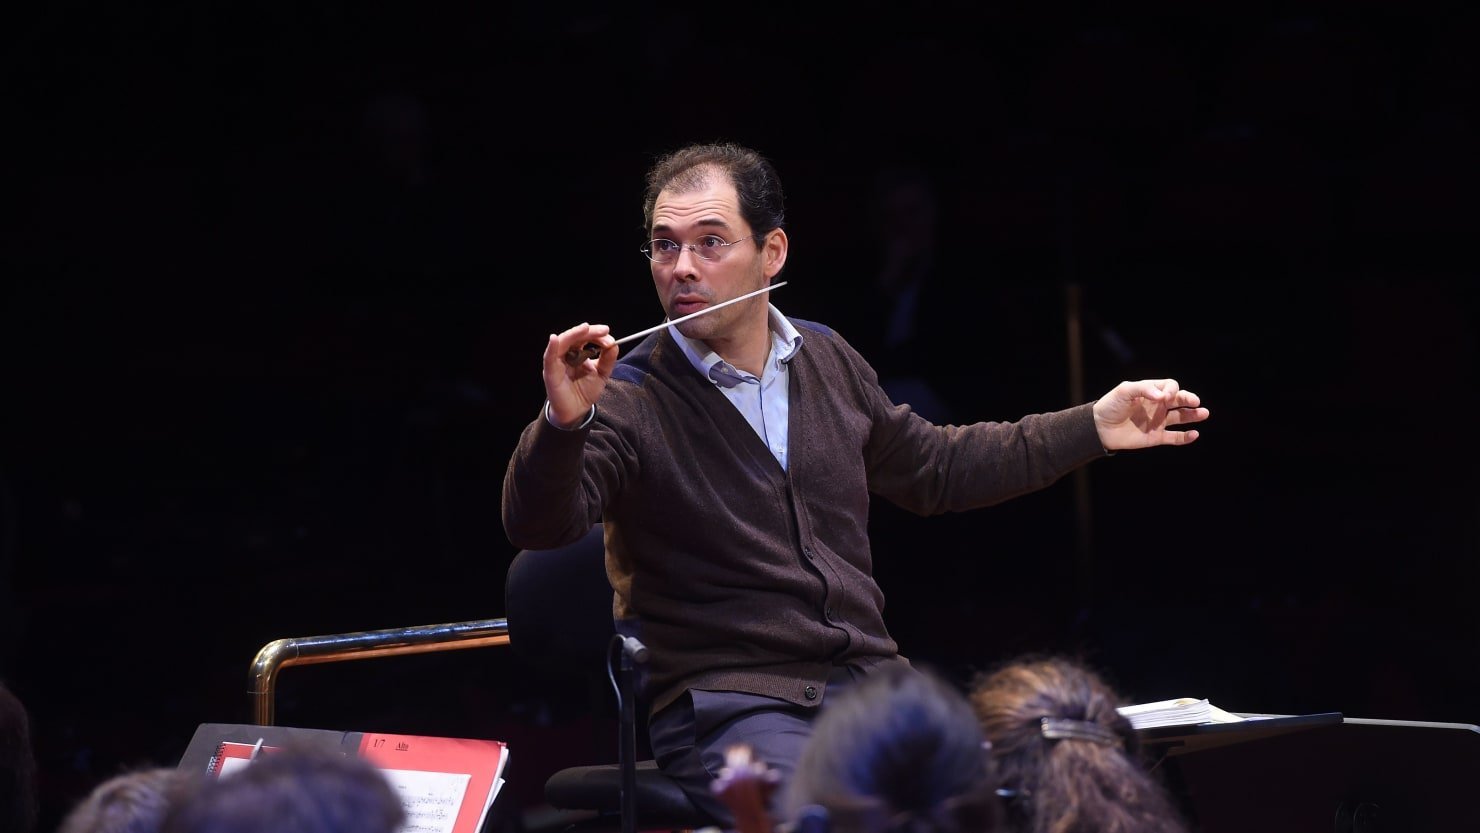 Bolshoi Conductor Tugan Sokhiev Resigns Russian, French Posts Under Pressure to Denounce Putin’s Invasion